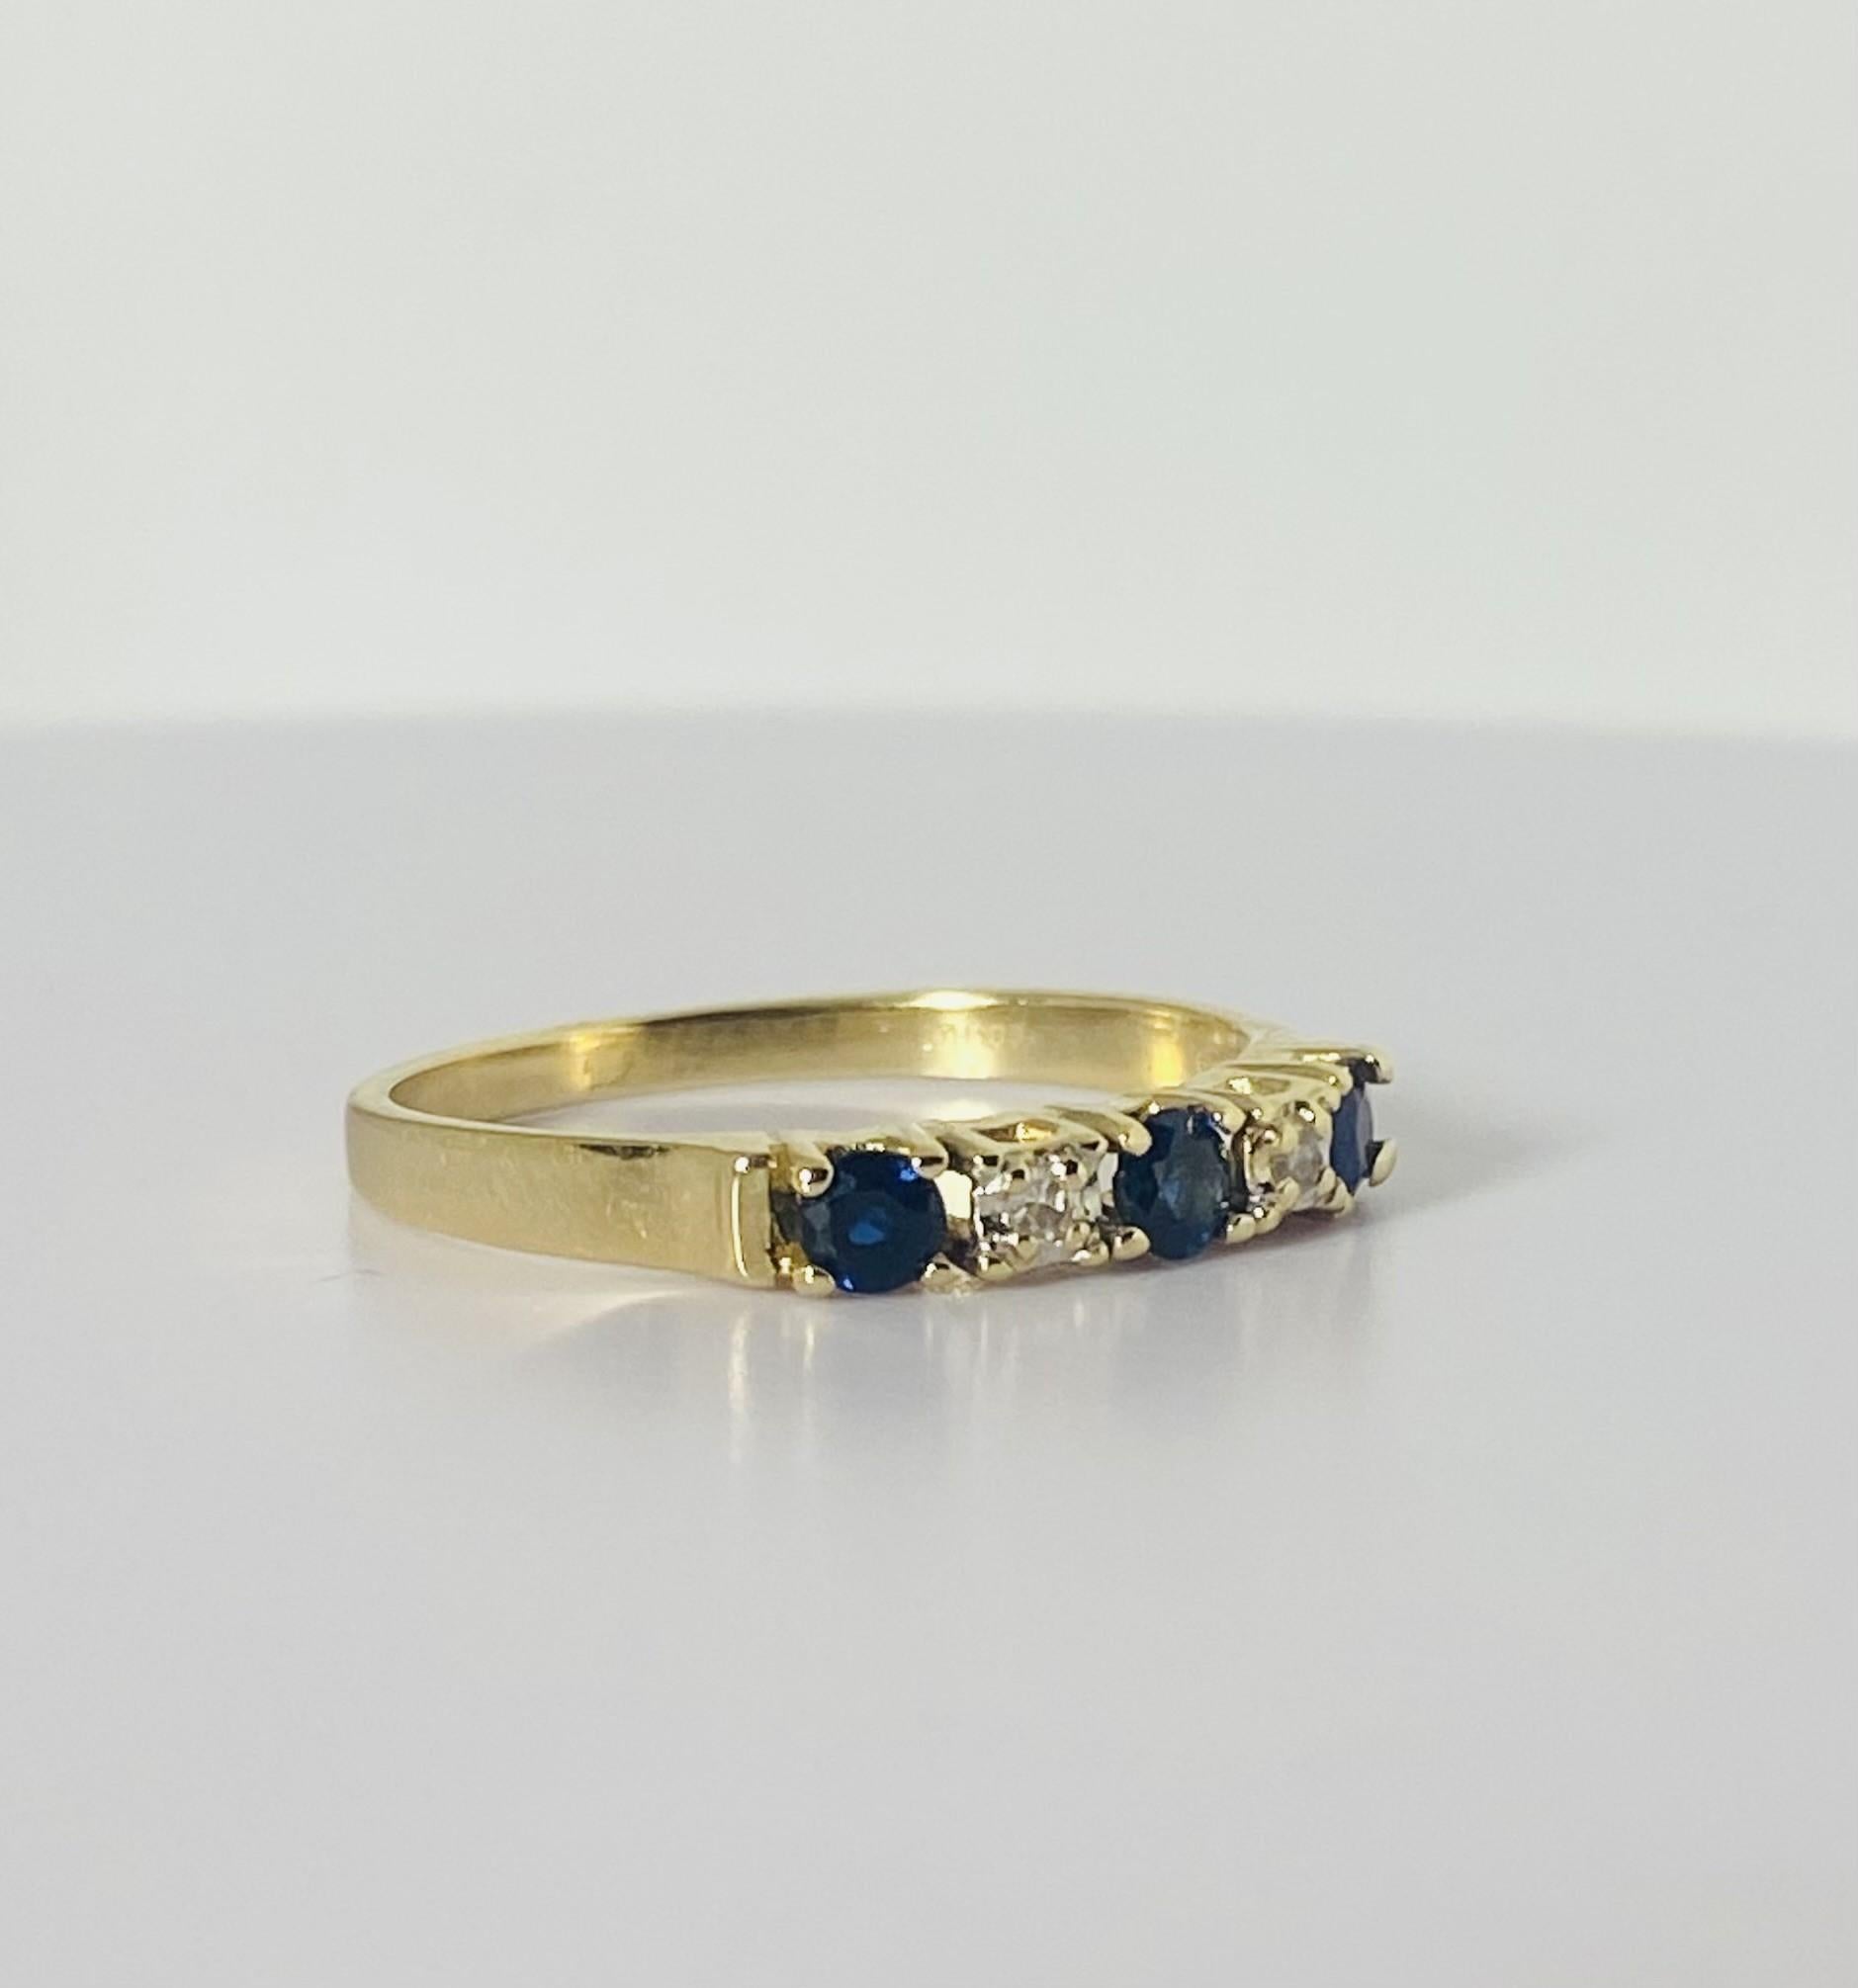 Vintage ring with blue sapphires & diamonds from the 1950S, 14 carat yellow gold 2